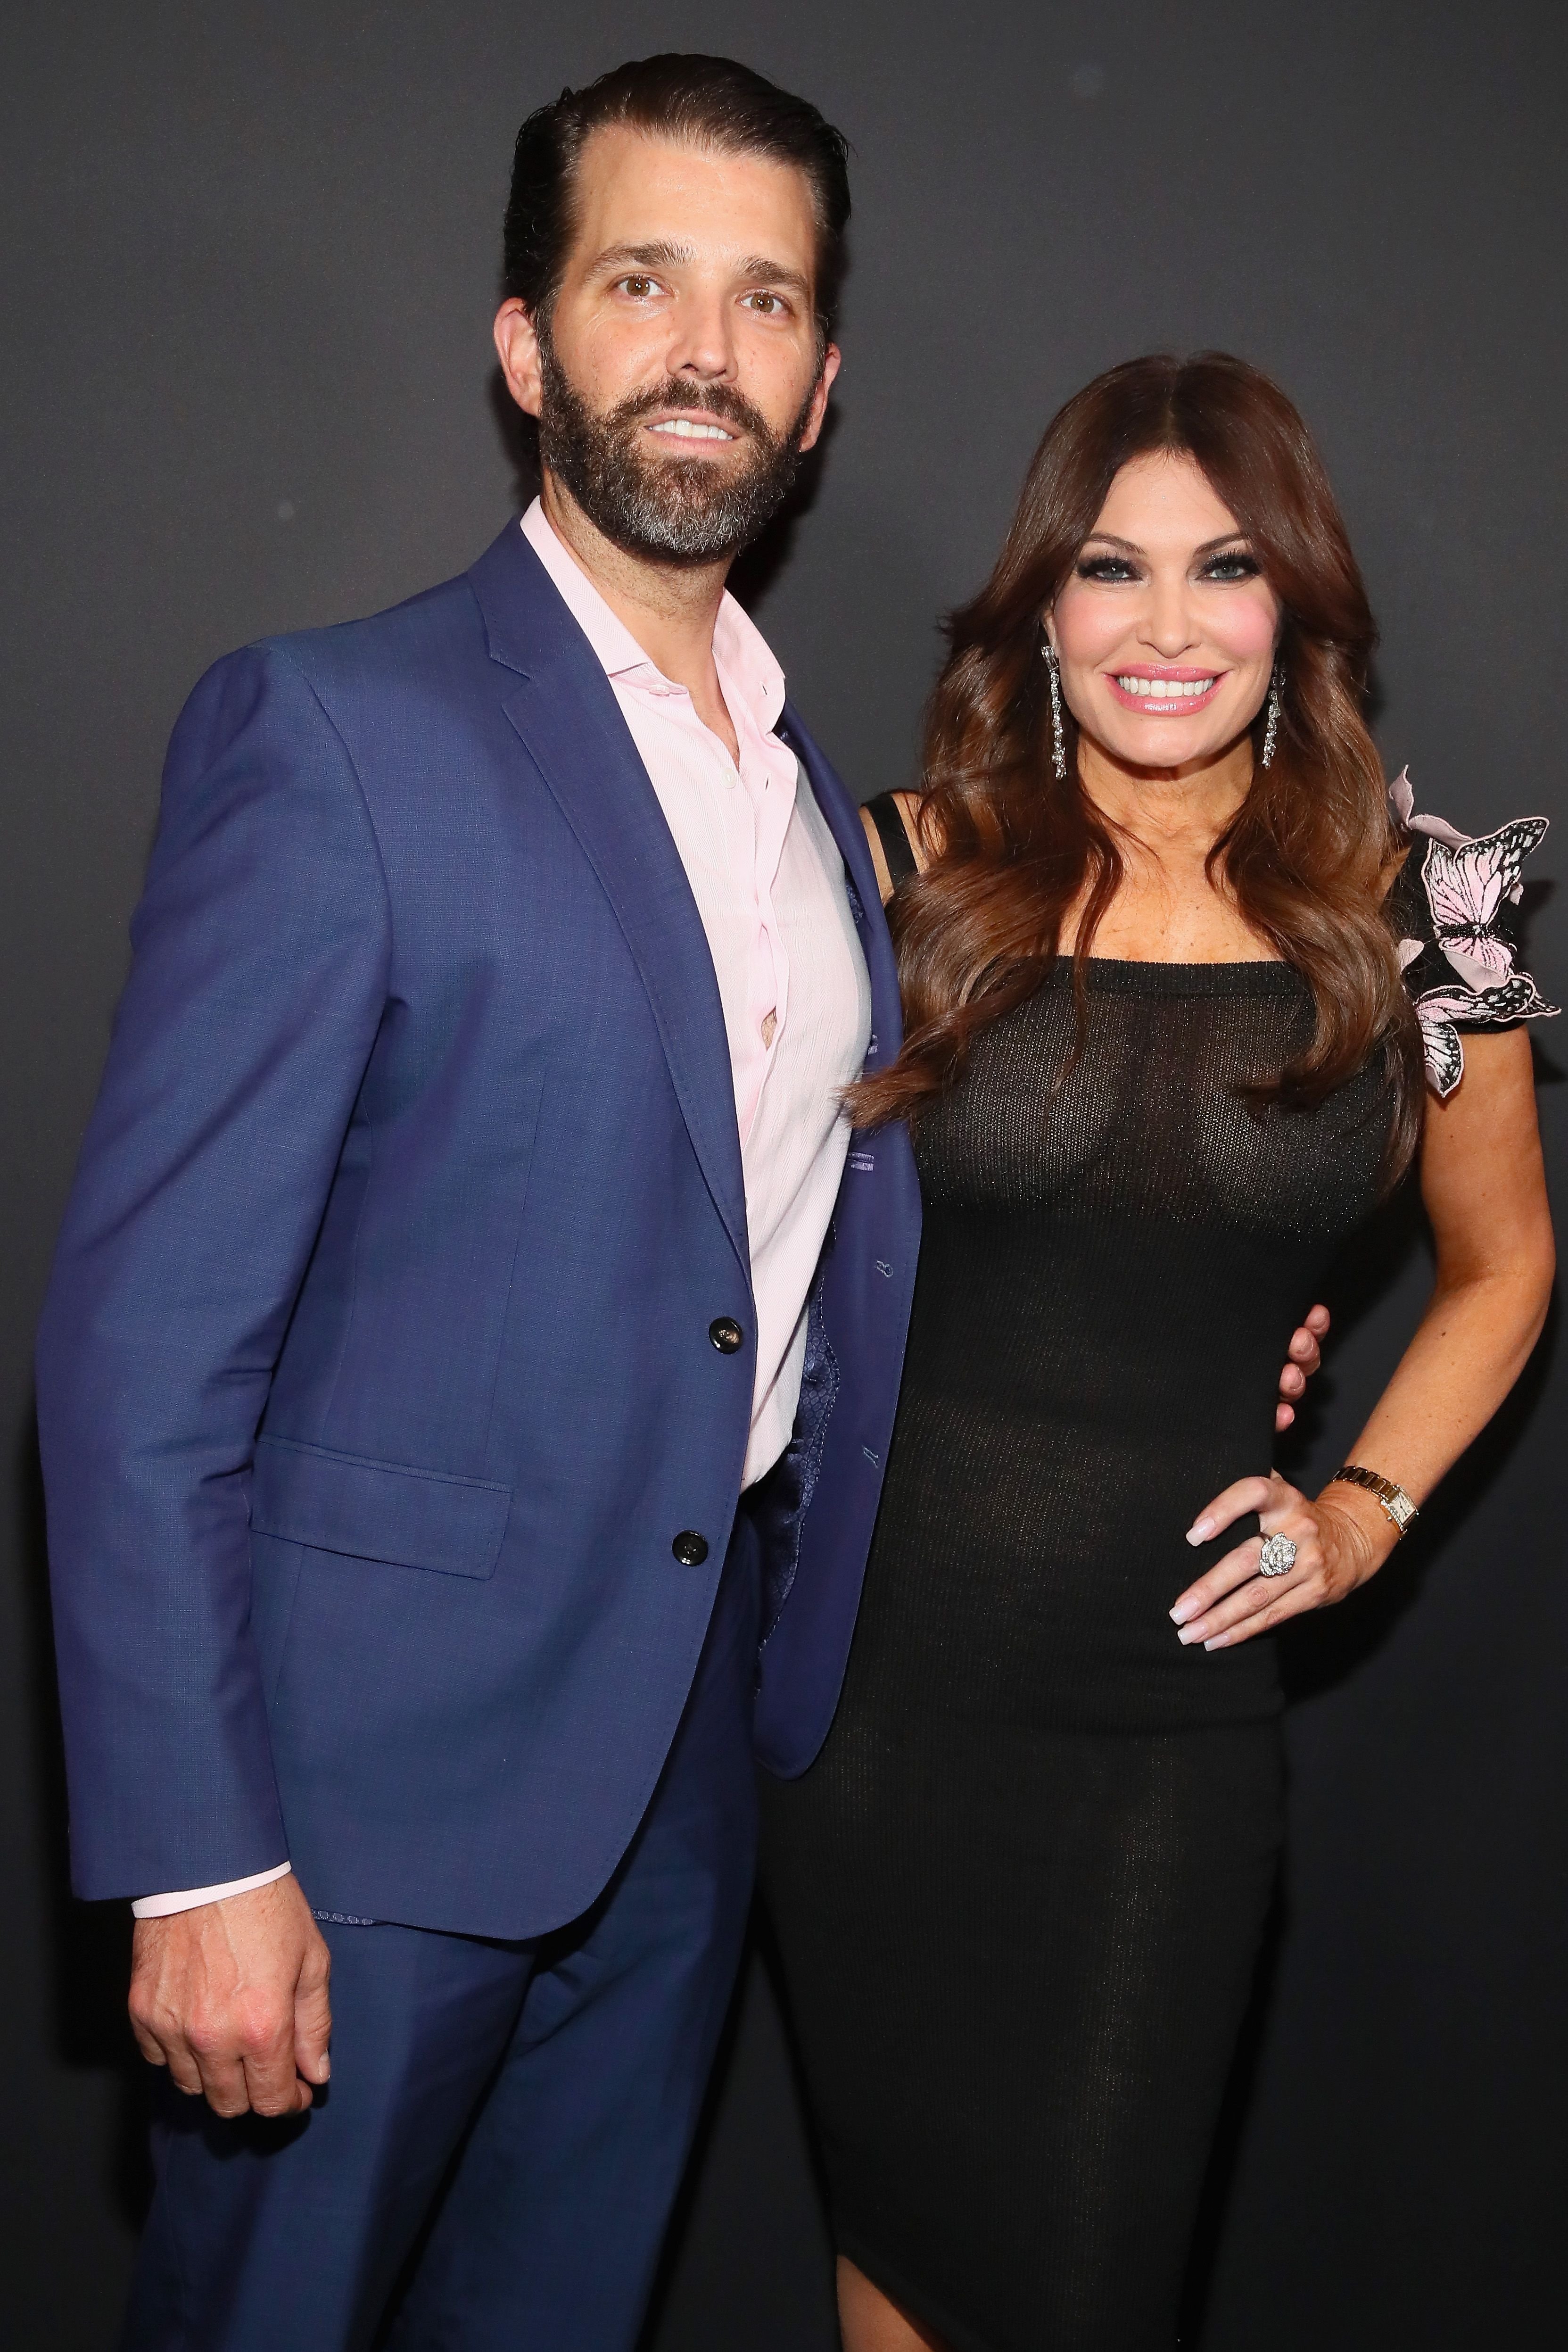 Kimberly Guilfoyle and Donald Trump Jr posing backstage for the Zang Toi fashion show during the New York Fashion Week at Spring Studios in New York City | Photo: Astrid Stawiarz/Getty Images for NYFW: The Shows